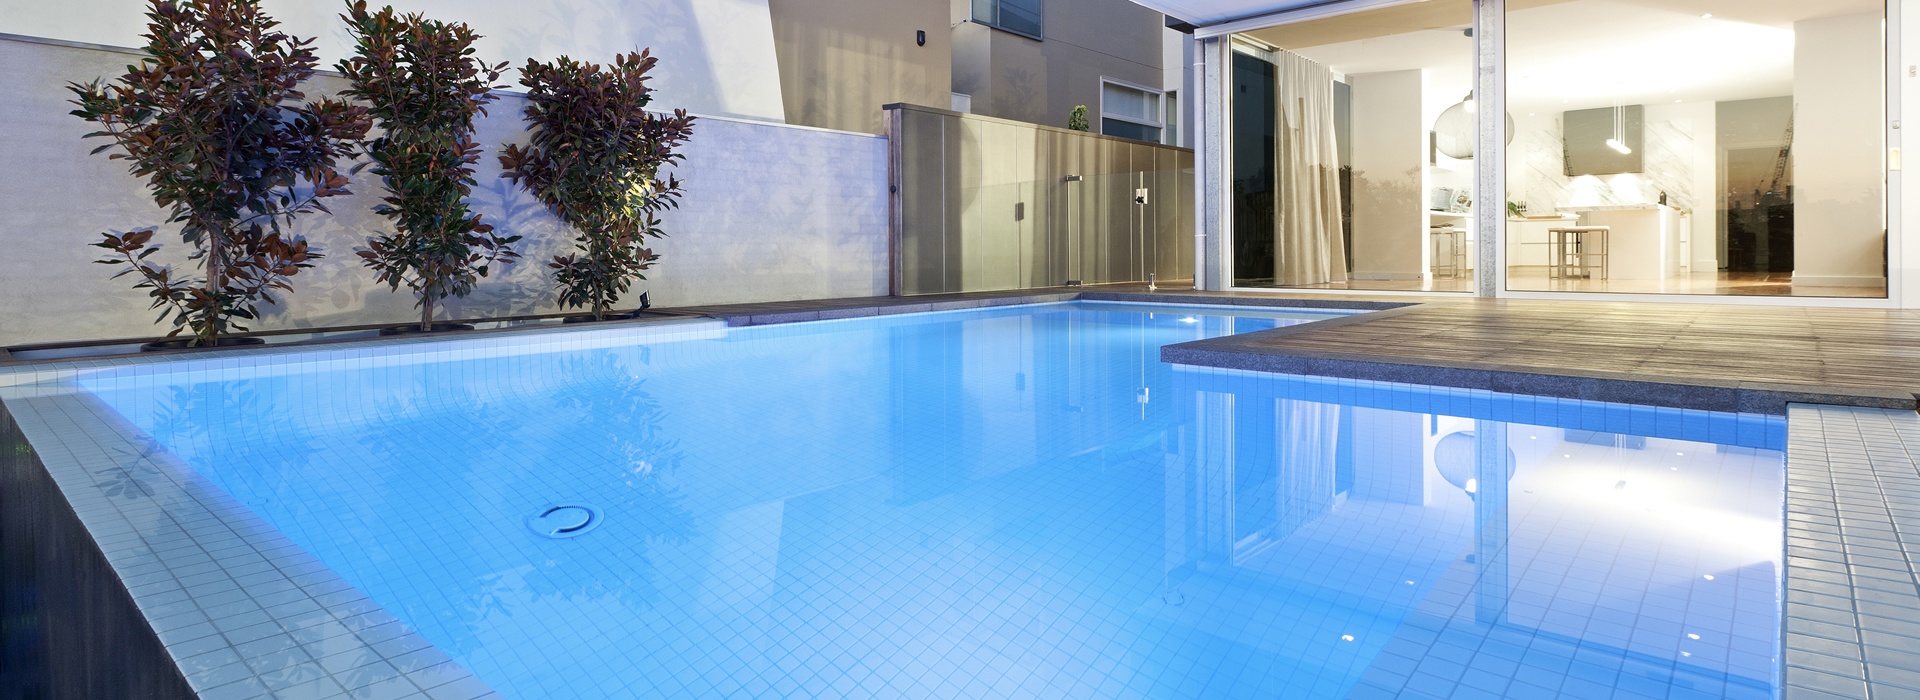 pool4 Pool Builders Melbourne | Swimming Pool Construction